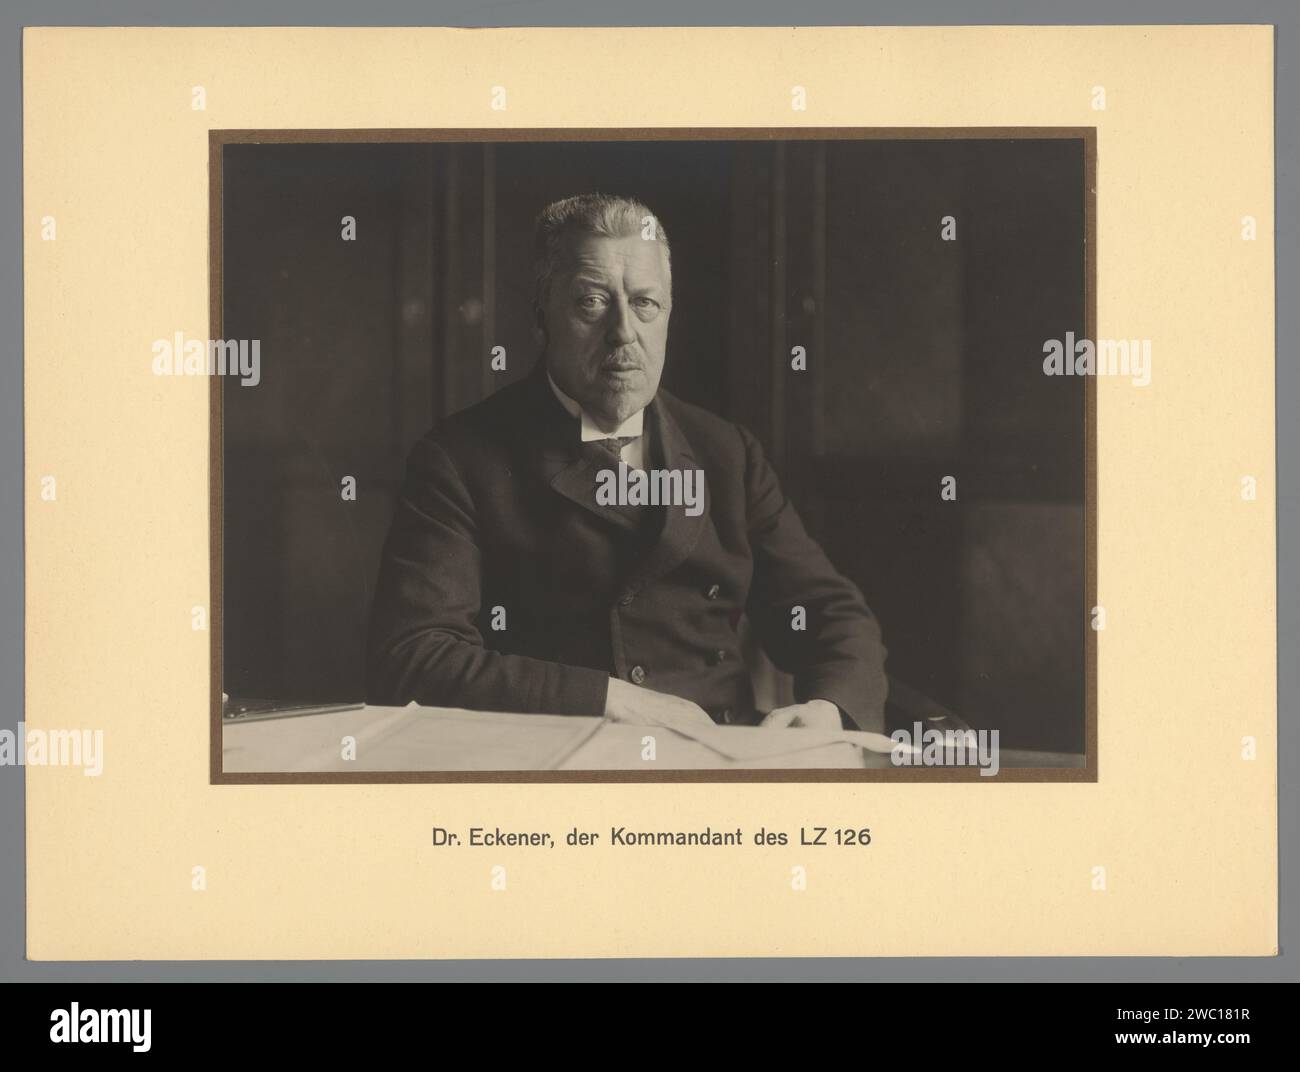 Portrait of Dr. Hugo Eckener, the commander of the LZ 126, Anonymous, 1924 photograph Portrait of director Dr. Hugo Eckener, the commander of the LZ 126, sitting behind the desk. Part of a folder of twenty product photos of the Zeppelin air ship LZ 126. Germanypublisher: Friedrichshafen cardboard. photographic support gelatin silver print historical persons. 46C35 airship, zeppelin Stock Photo